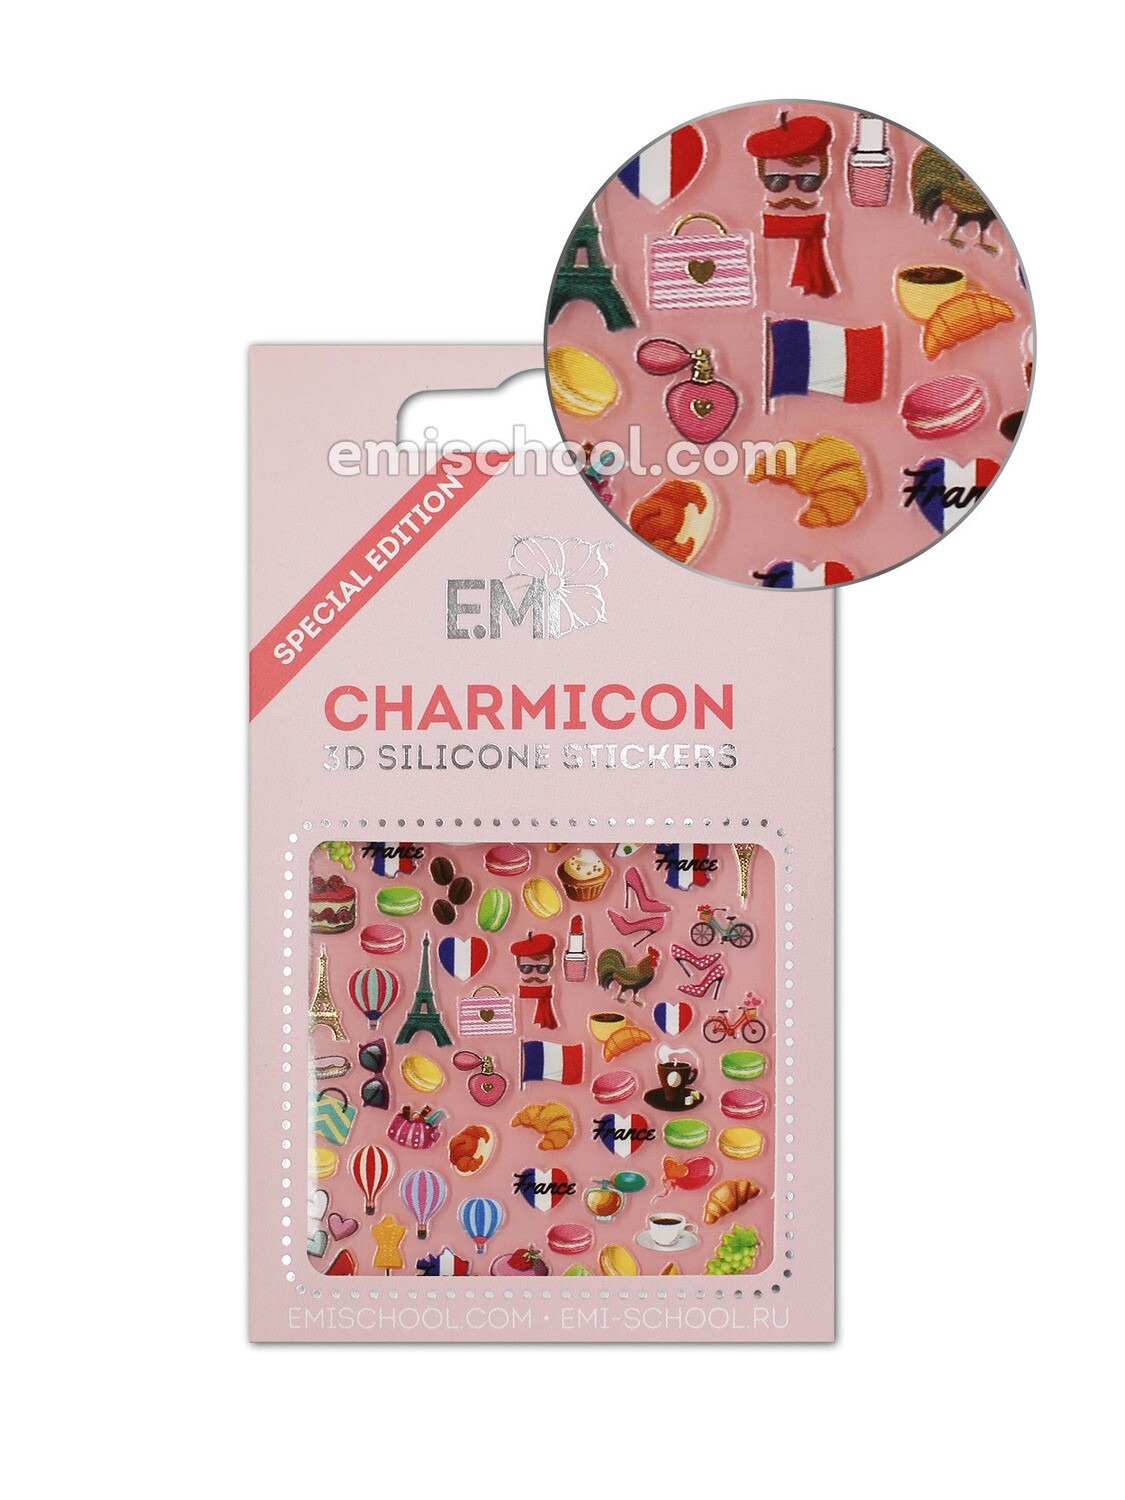 Charmicon 3D Silicone Stickers France 1